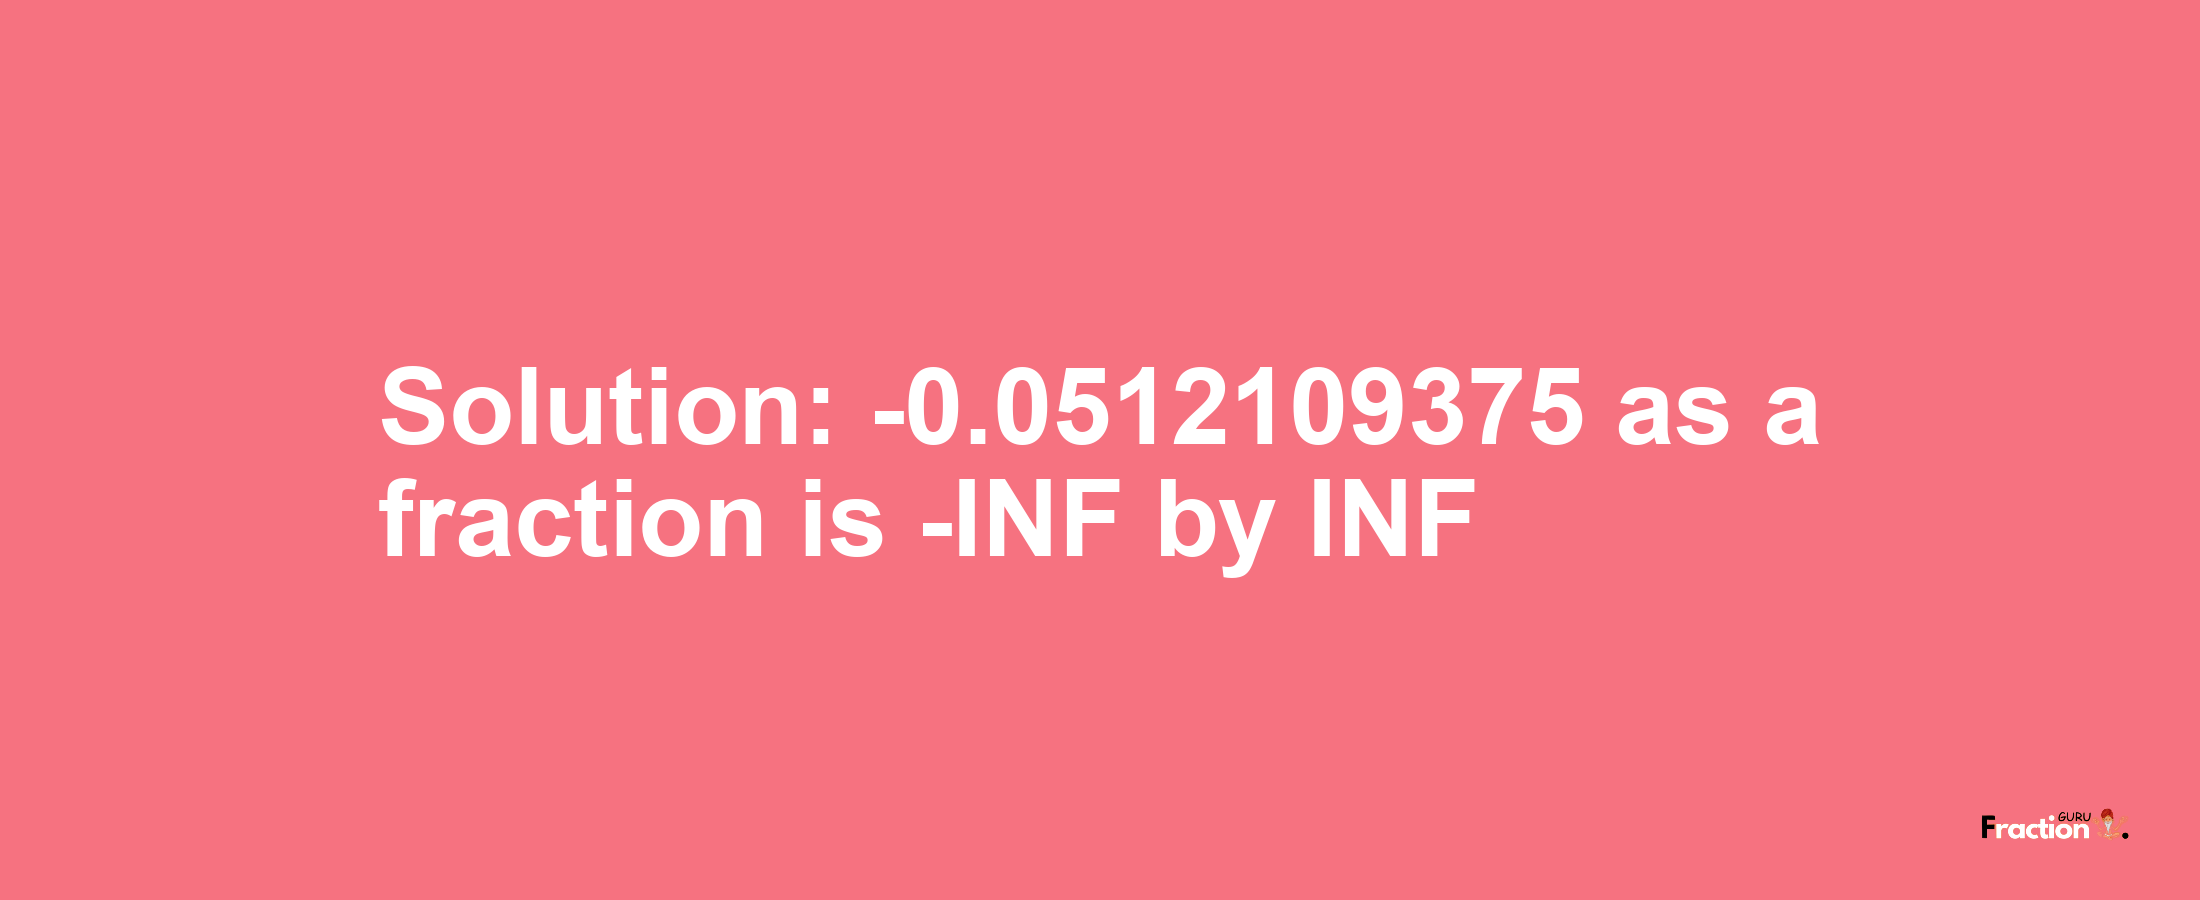 Solution:-0.0512109375 as a fraction is -INF/INF